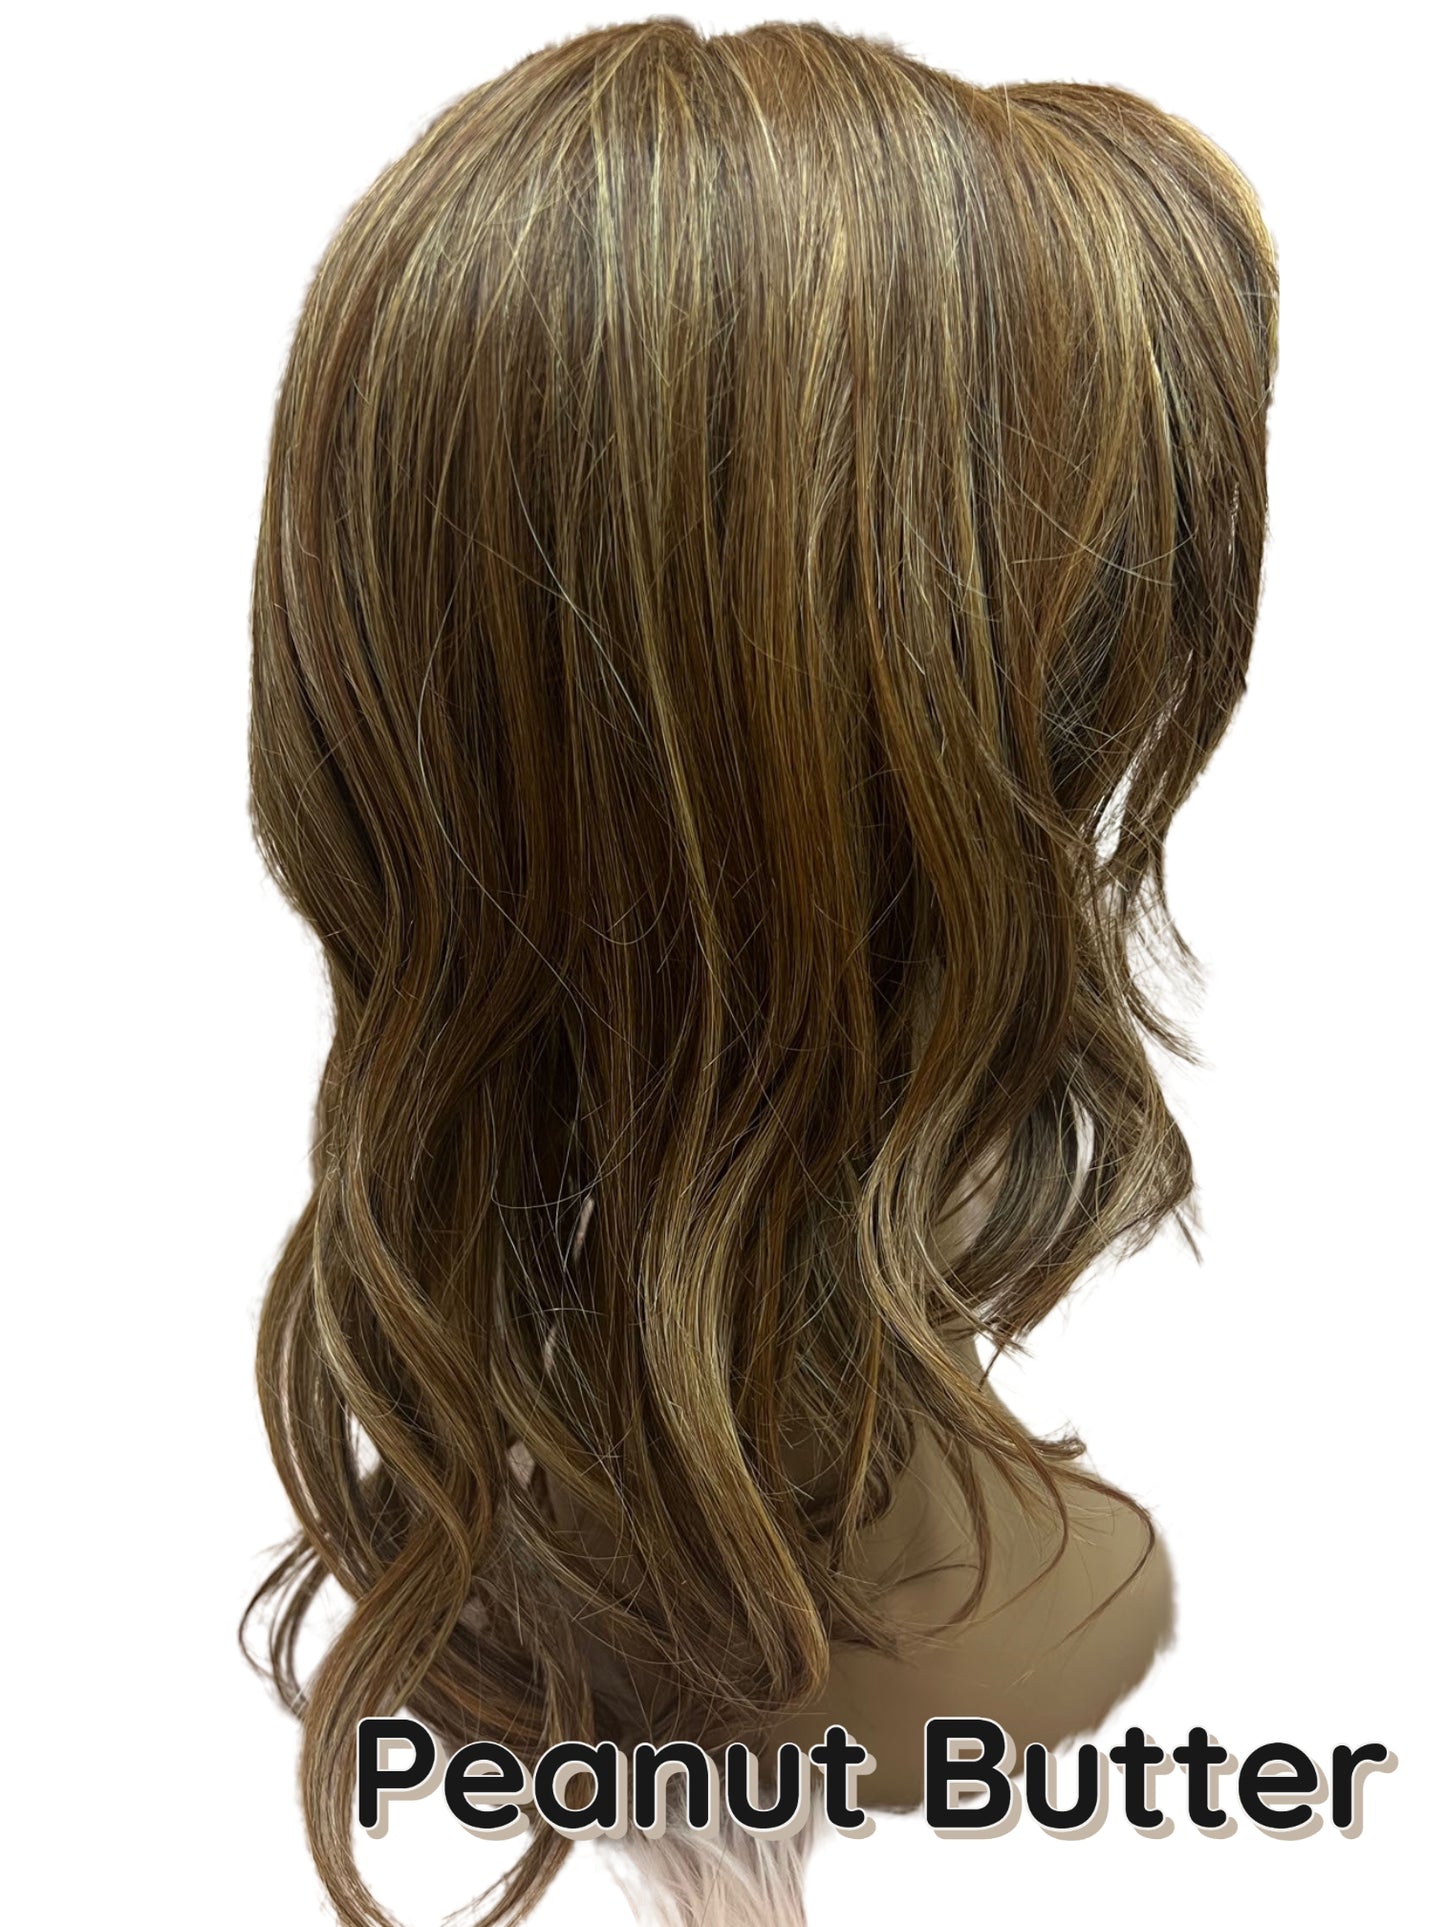 19 inch Topper Beach Wave Bangs LACE FRONT - 40% OFF THIS PRICE NO CODE NEEDED - FINAL SALE